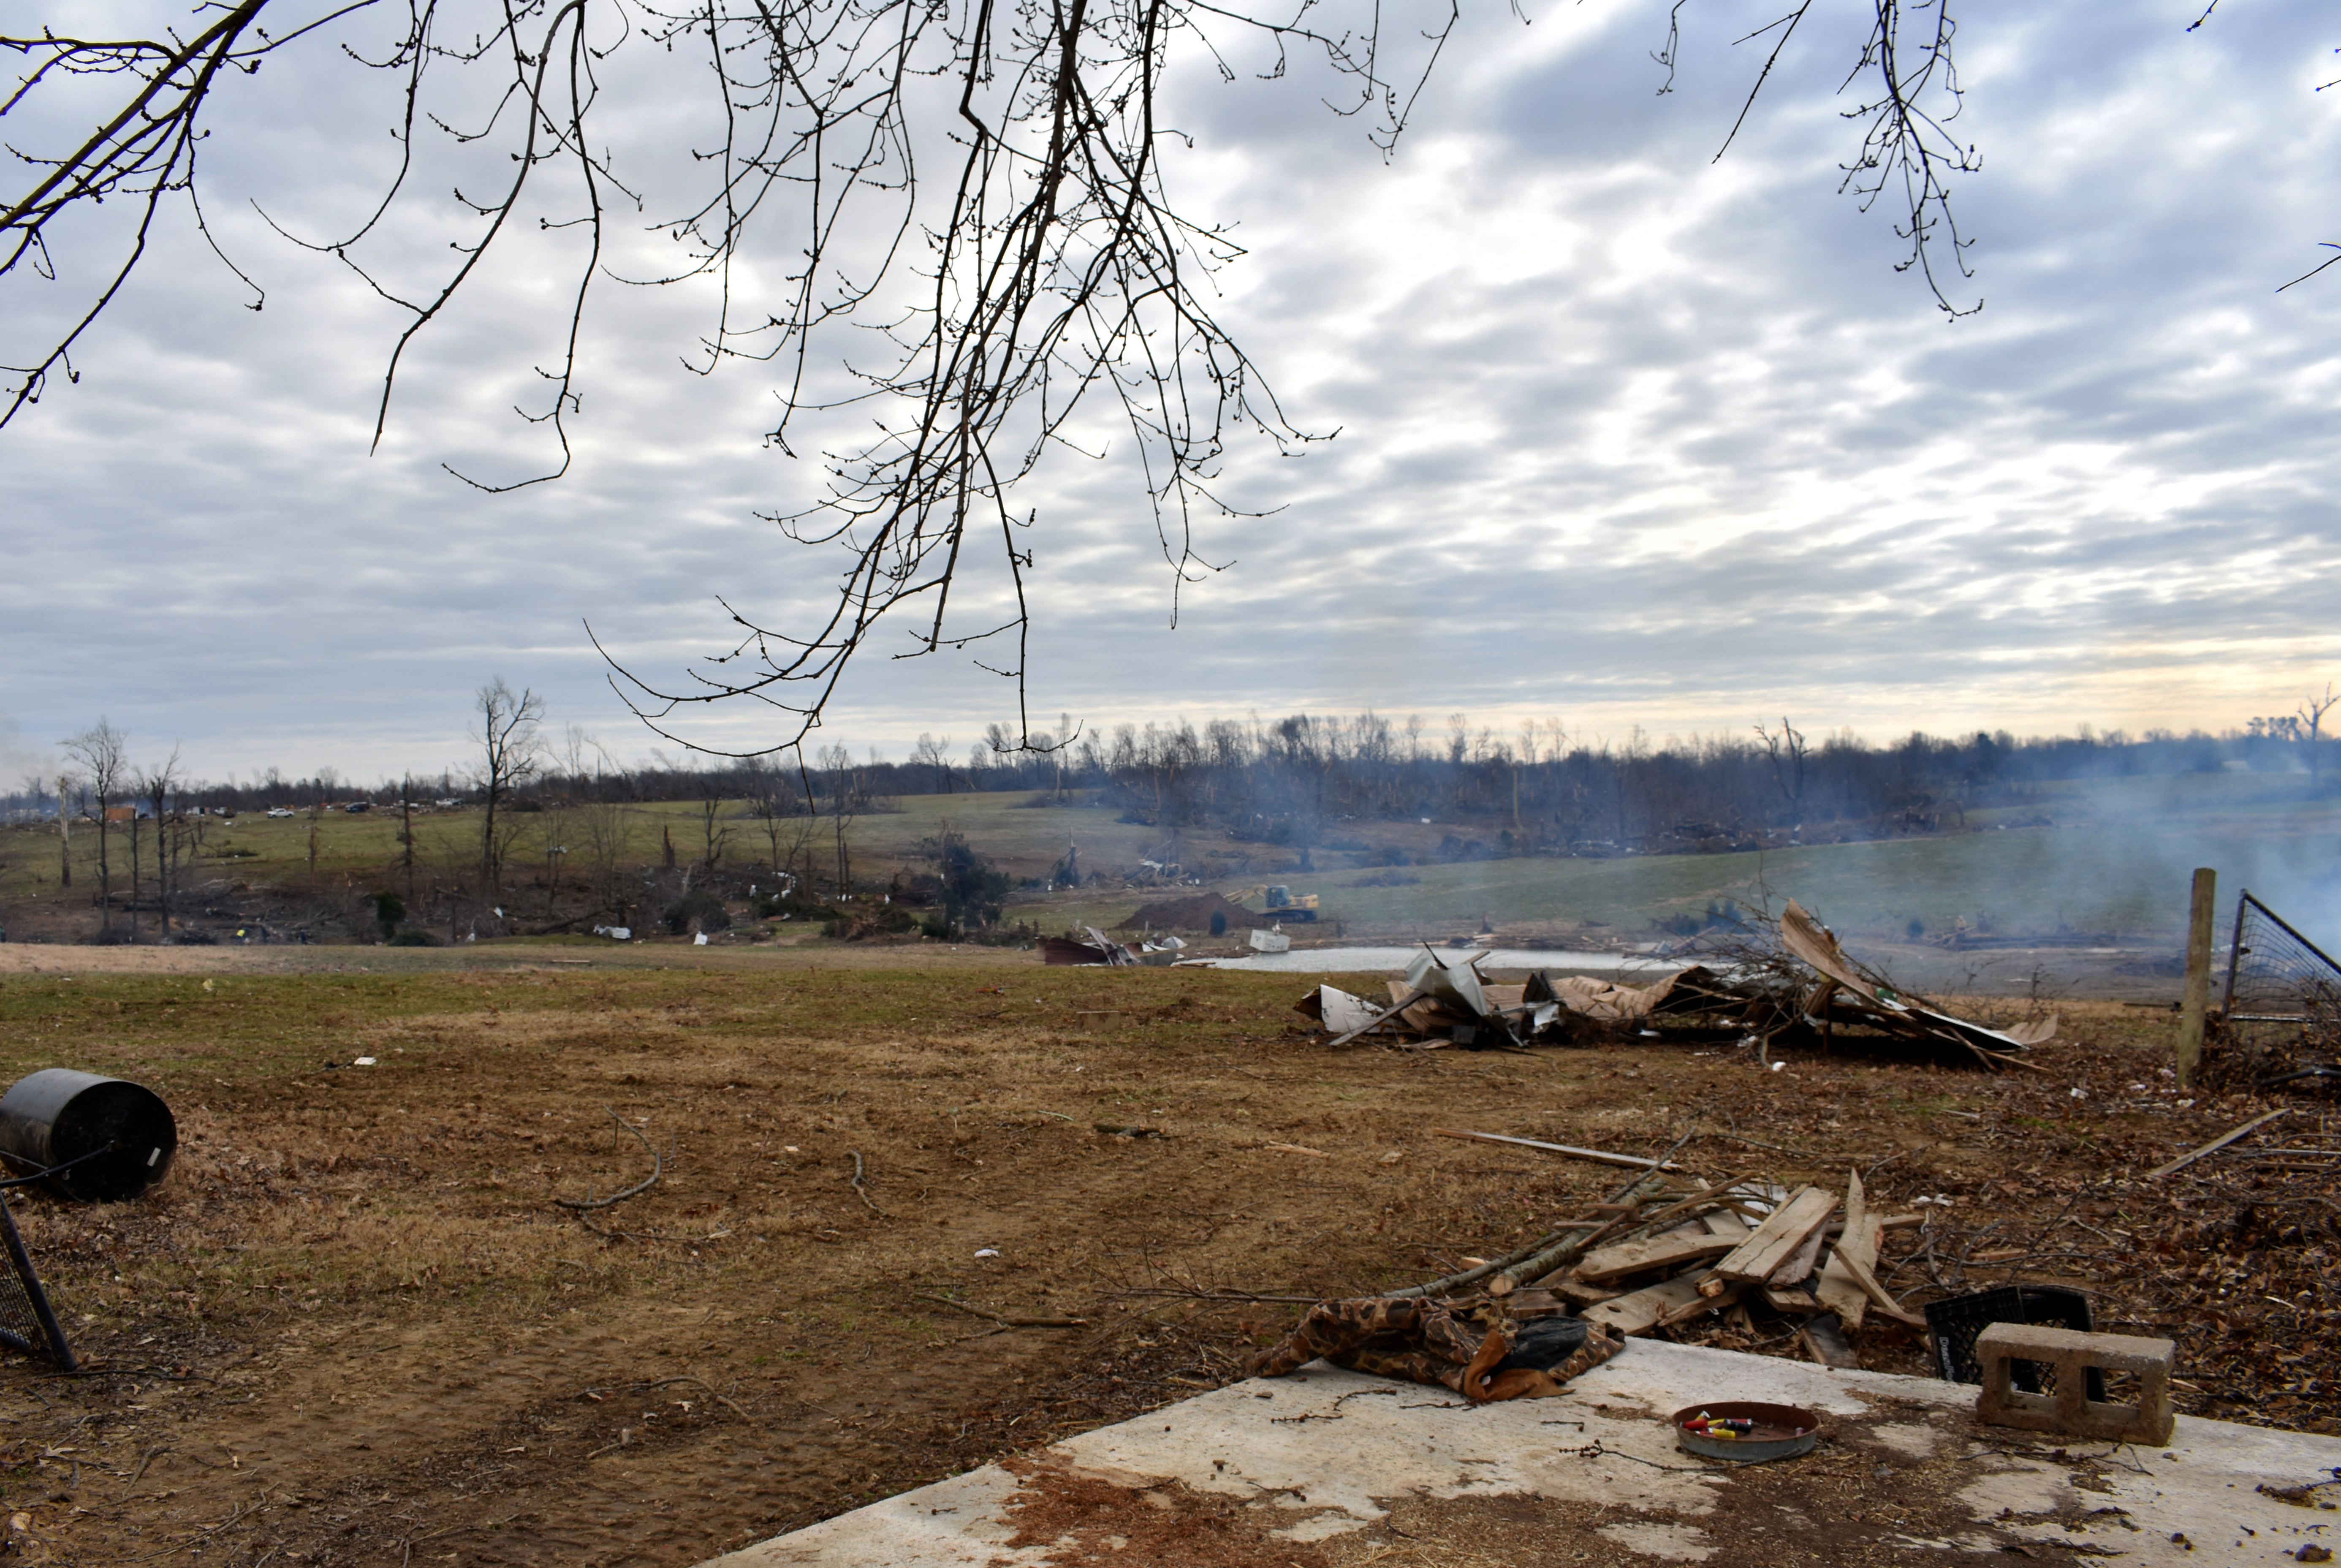 Cleanup efforts were already underway at Kenny Smith's Bremen farm after a December tornado caused significant damage to his livestock operation. Photo by Katie Pratt, UK agricultural communications.